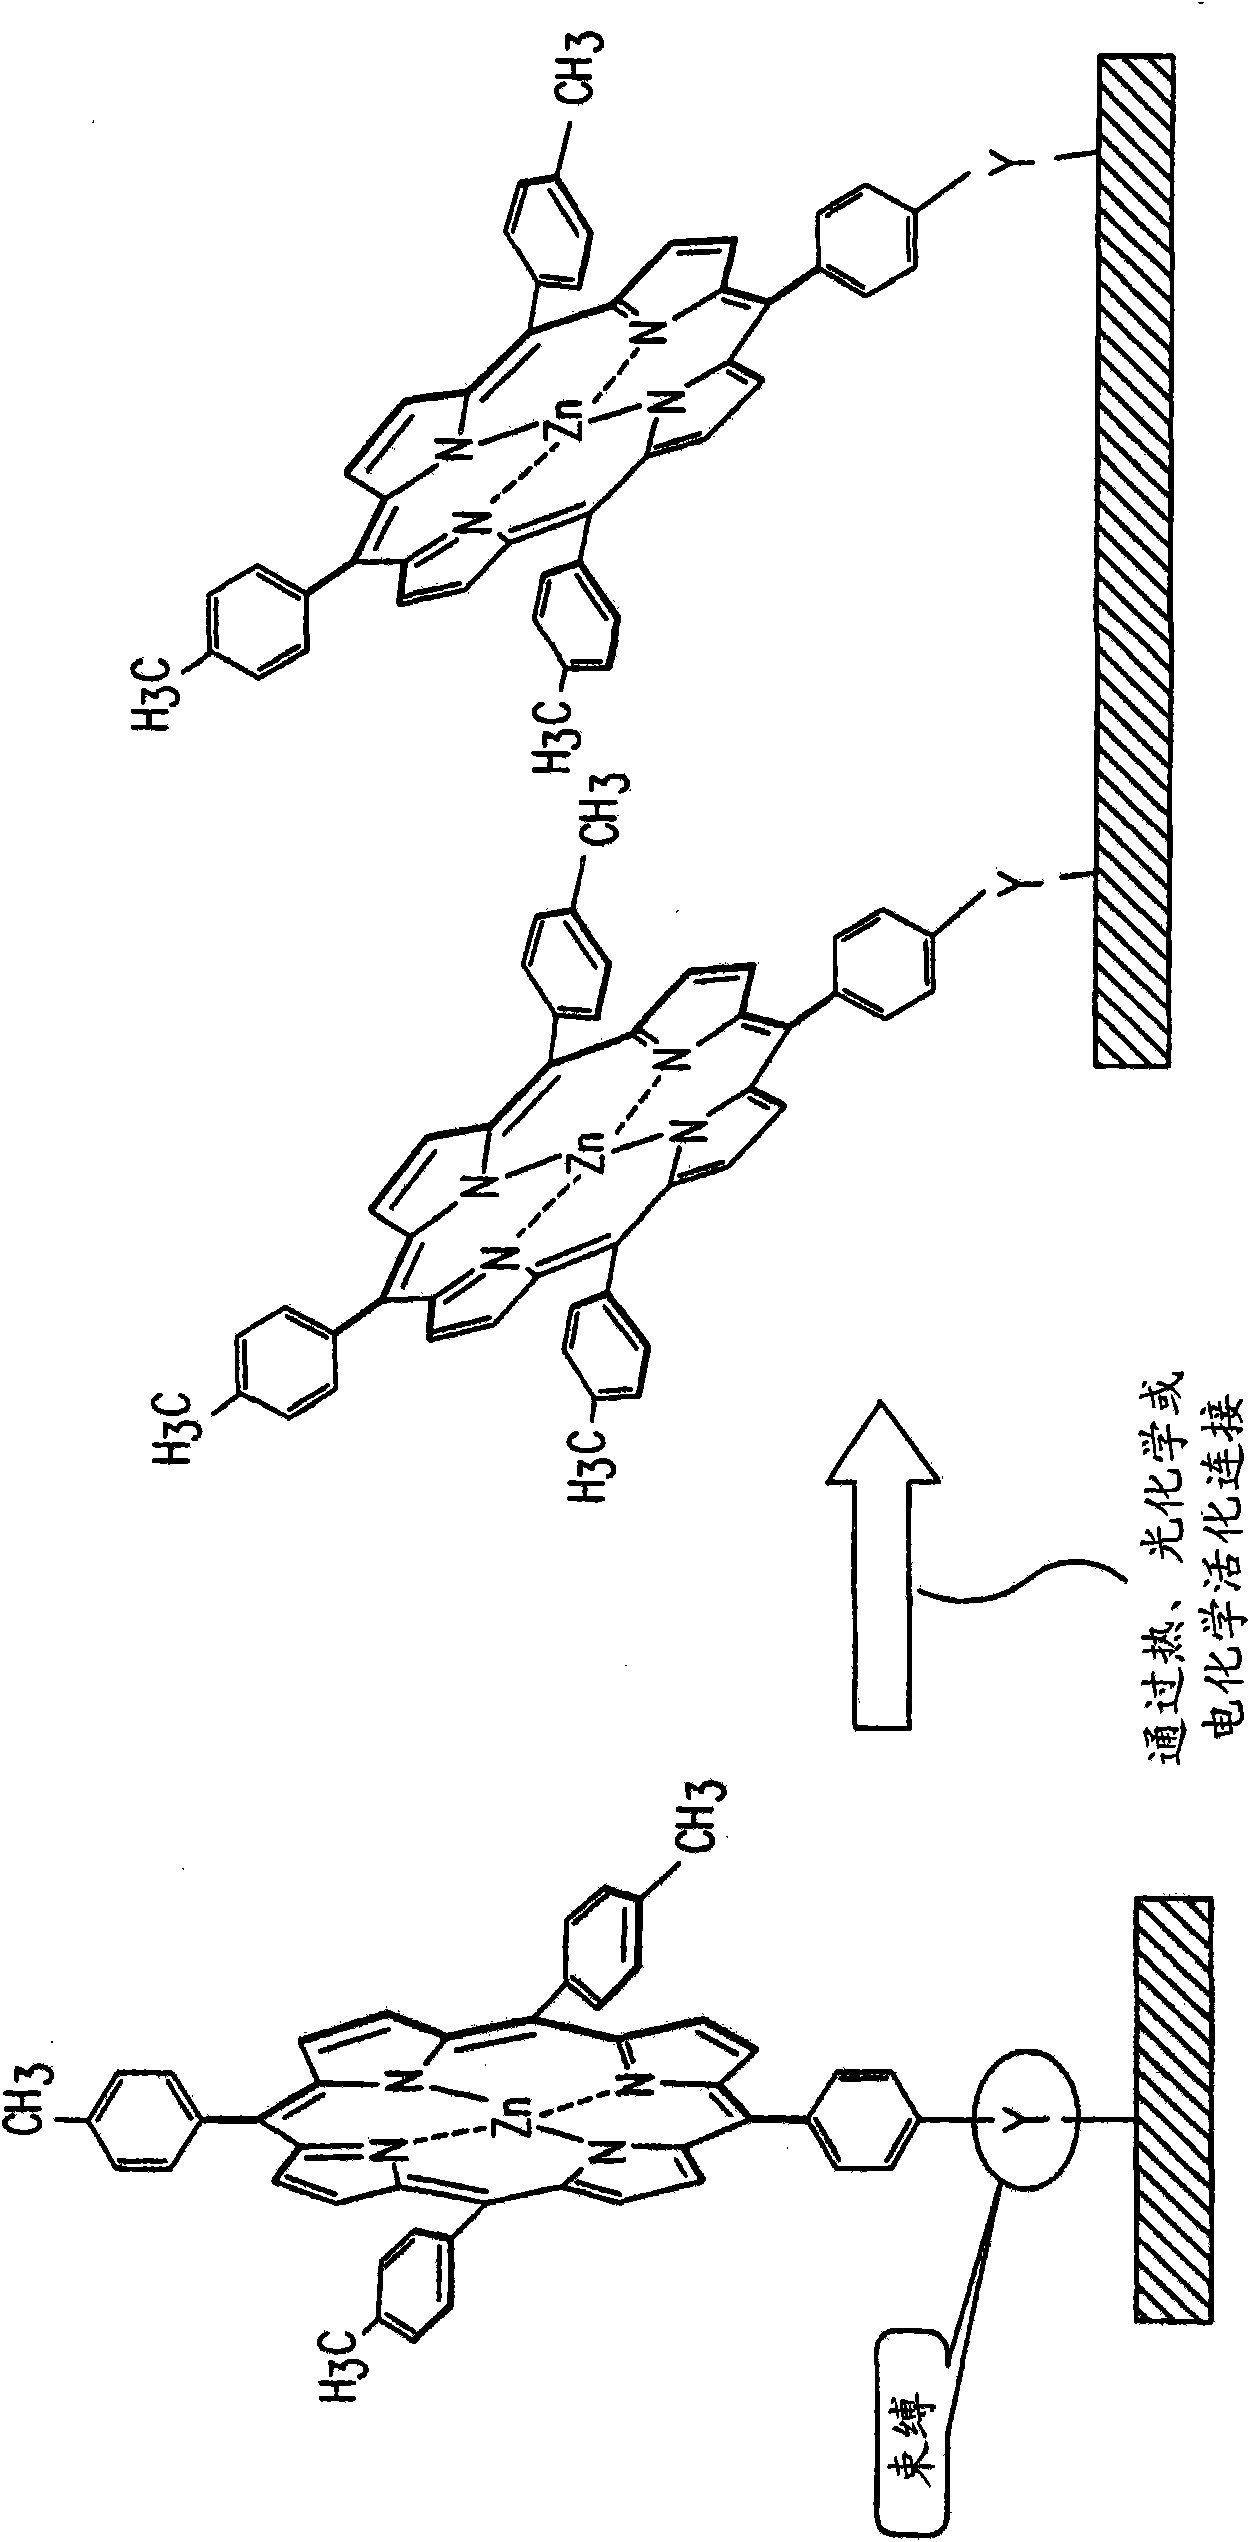 Methods of treating a surface to promote binding of molecule(s) of interest, coatings and devices formed therefrom